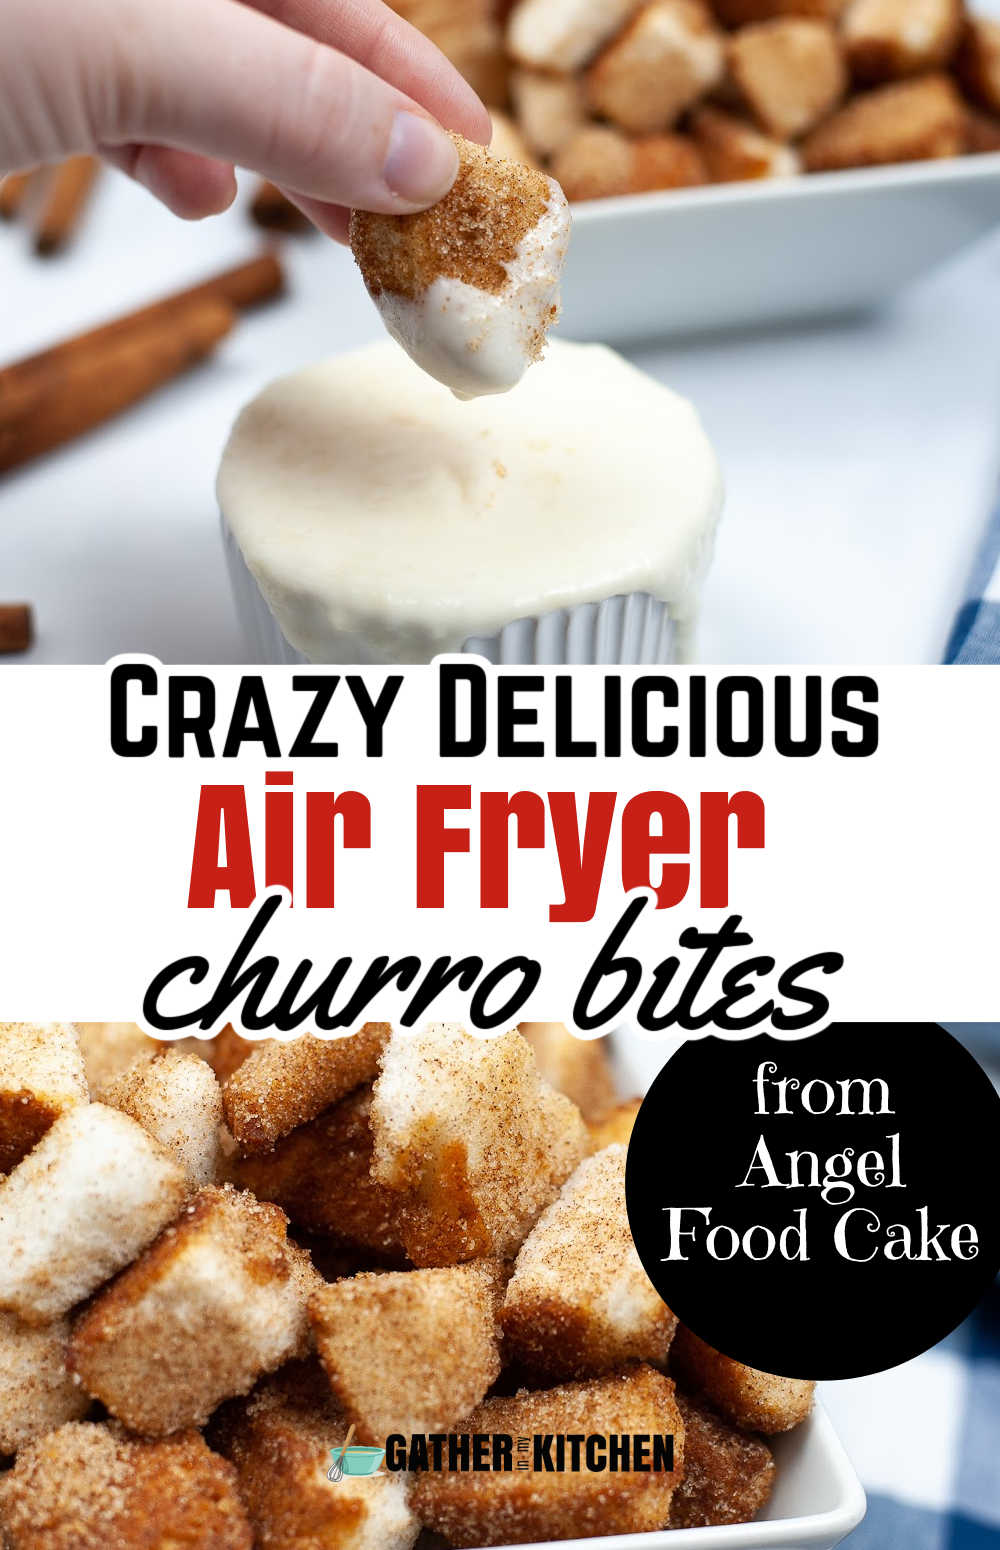 Pin image: top has a person dipping air fry churro bites into cream cheese dip, middle says "Crazy delicious air fryer churro bites: from Angel Food Cake" with a closeup pic of churro bites at the bottom.